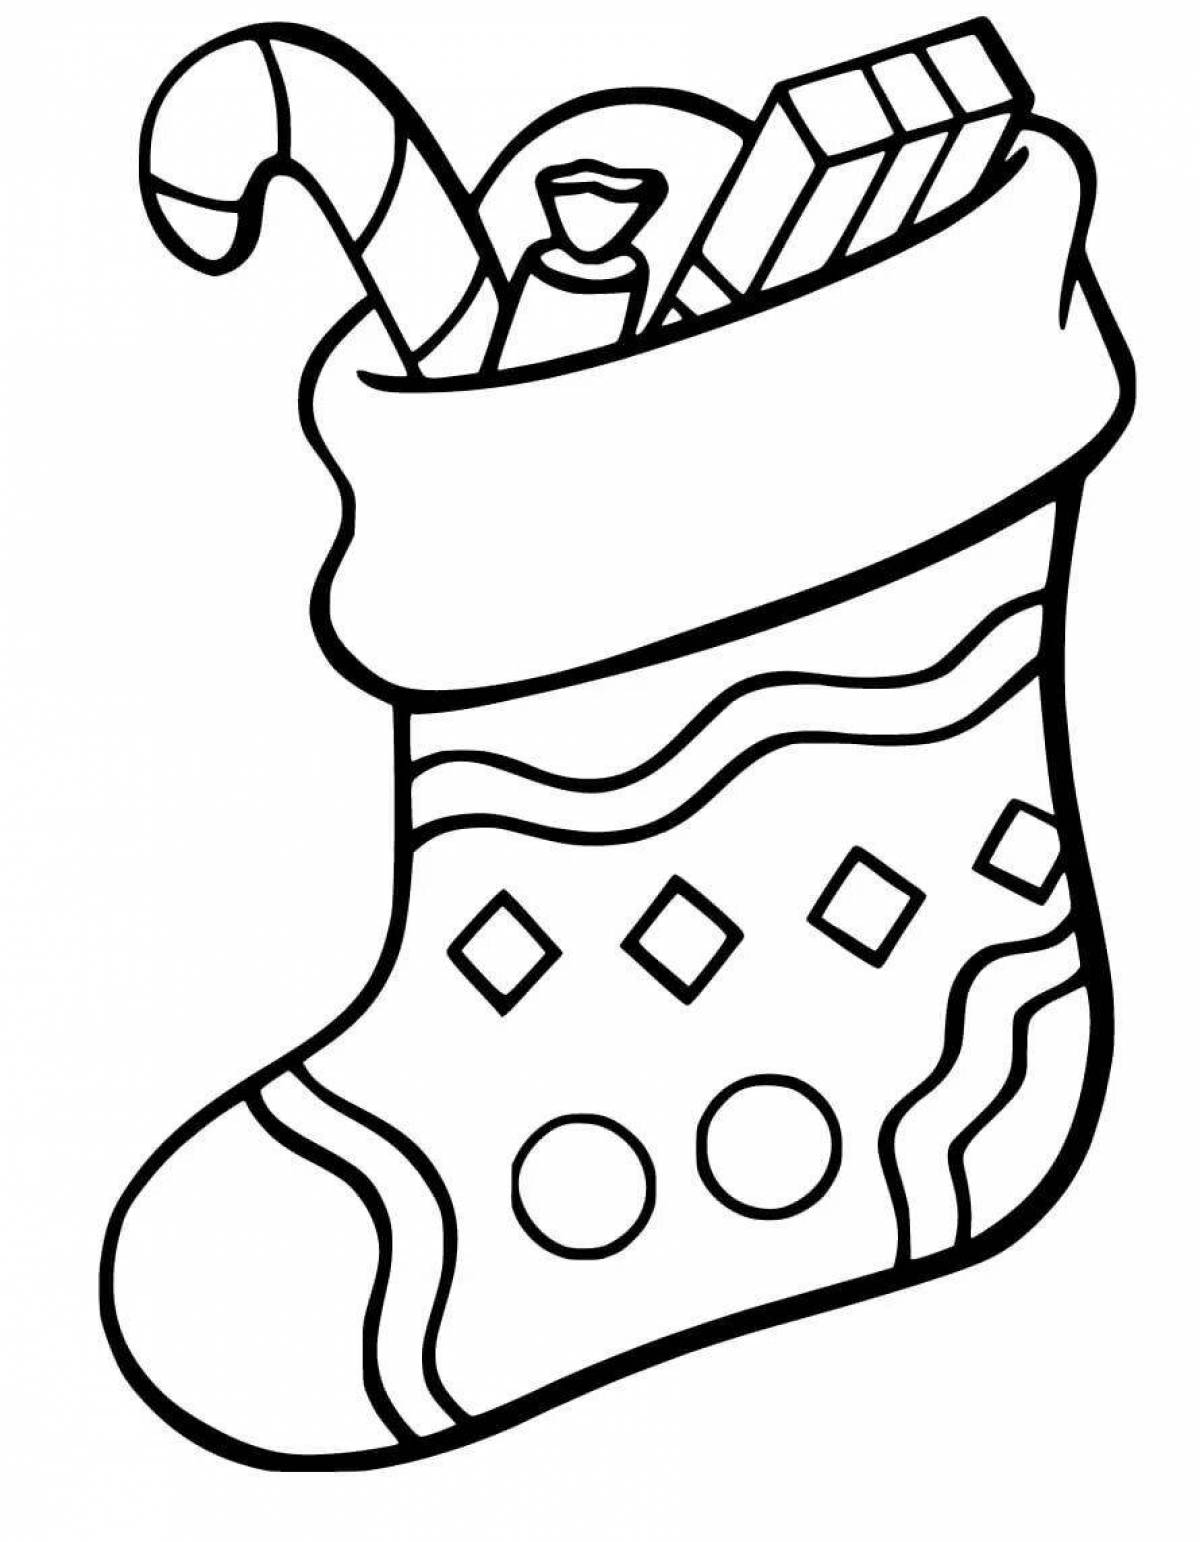 Exquisite shoe coloring book for toddlers